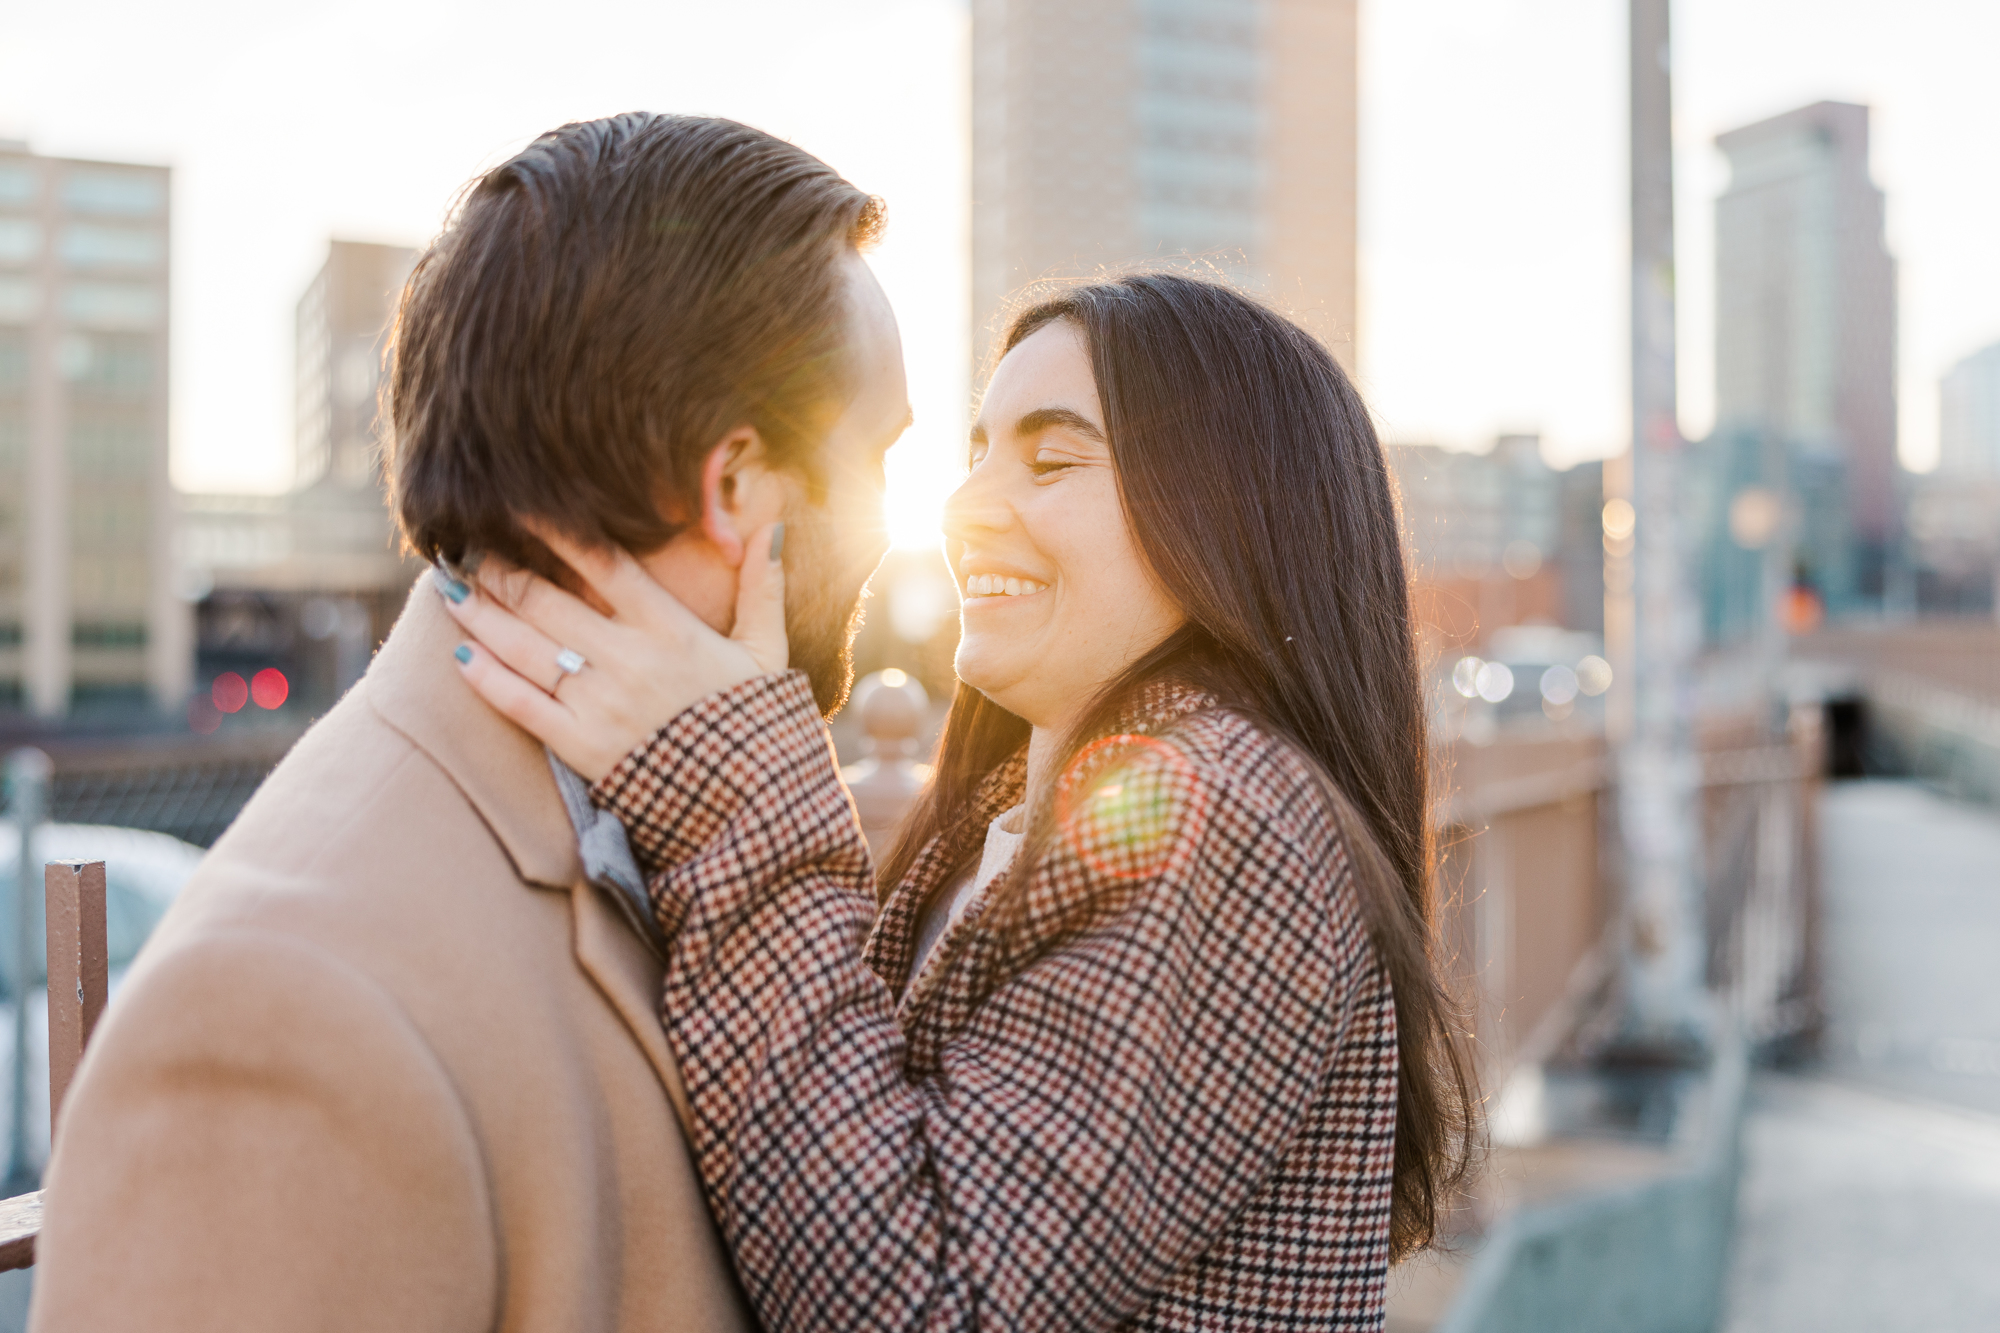 Glowing Winter Engagement Photos in DUMBO